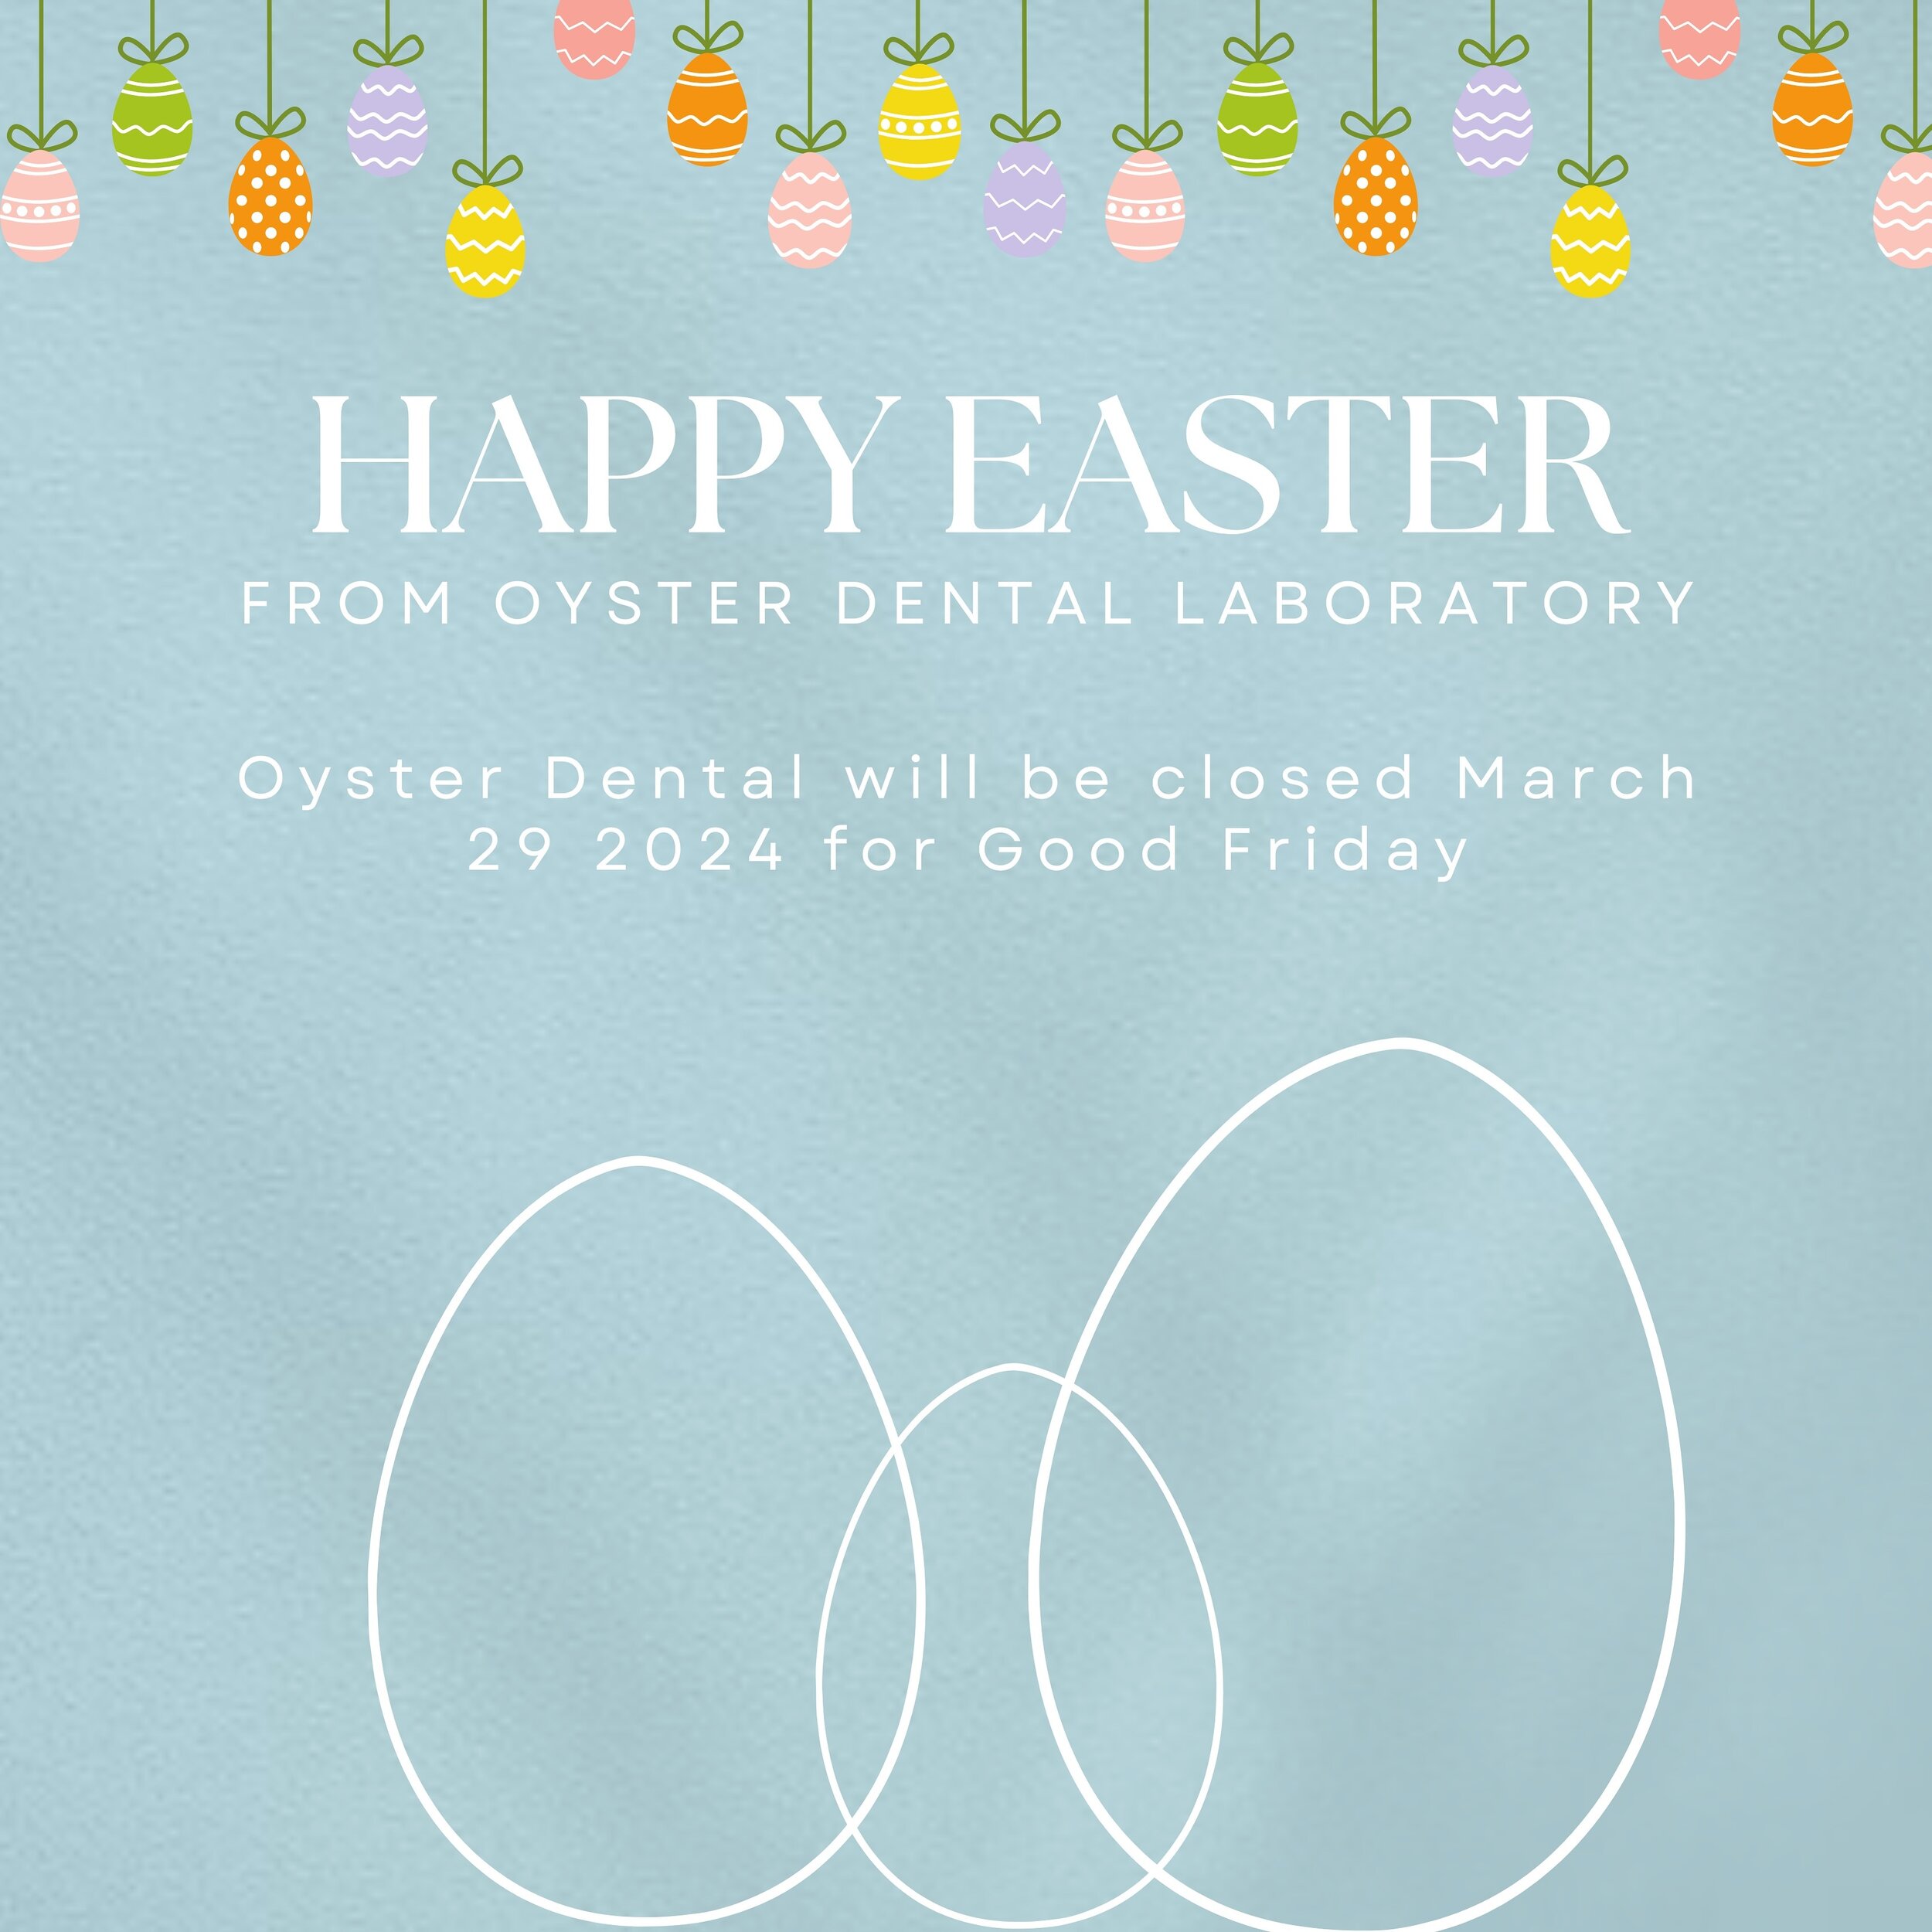 Happy Easter 🪺🐣

Oyster Dental will be closed on March 29, and regular hours will resume on Monday April 1st!